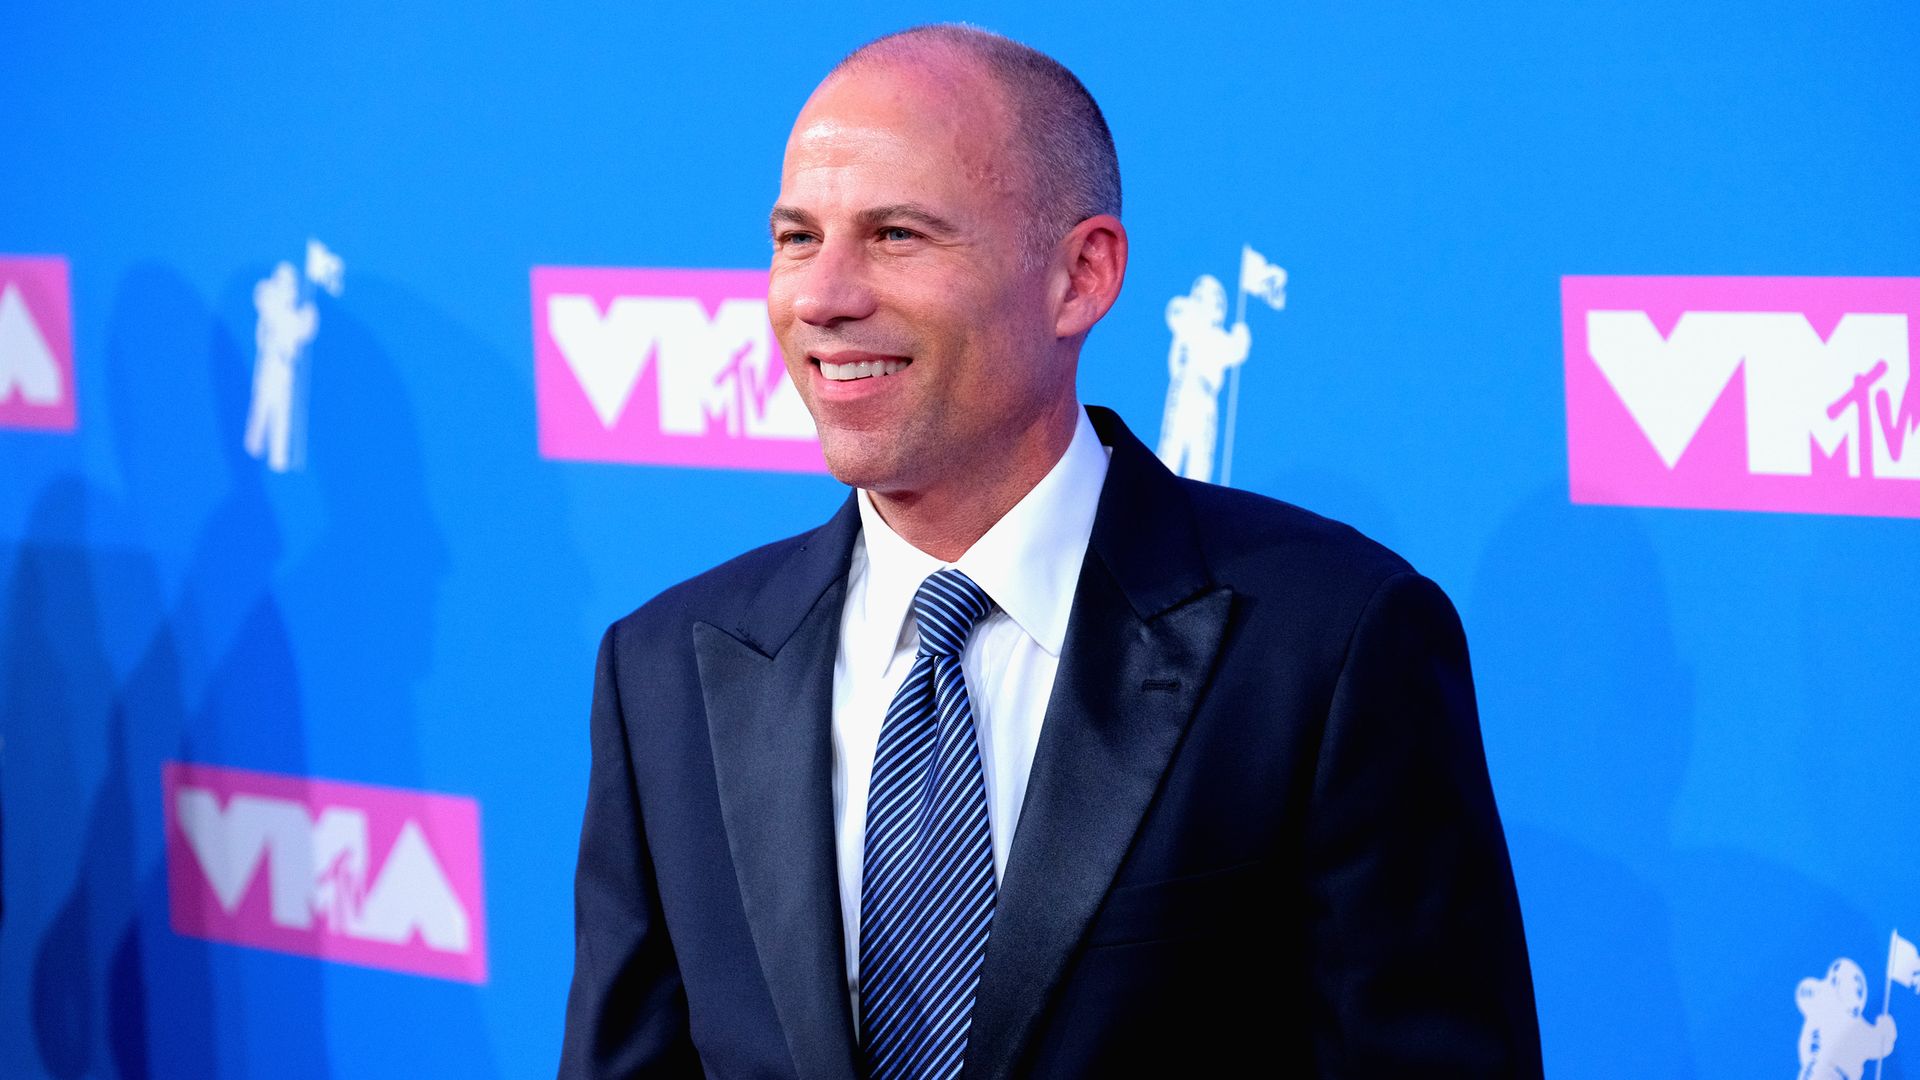 Michael Avenatti smiles on the pink carpet at the VMA's step and repeat